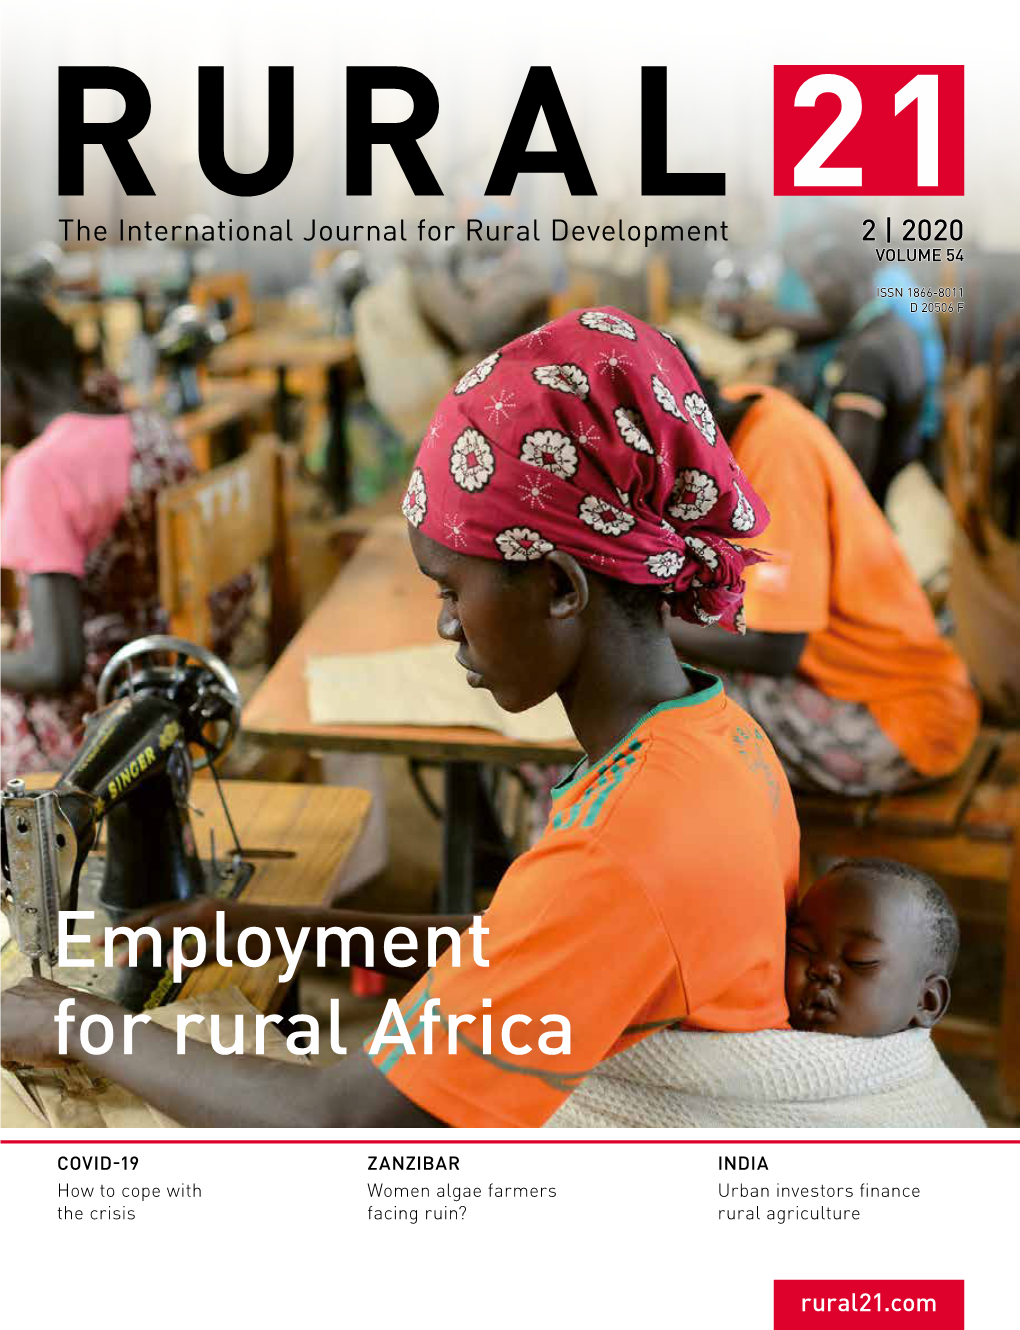 Employment for Rural Africa